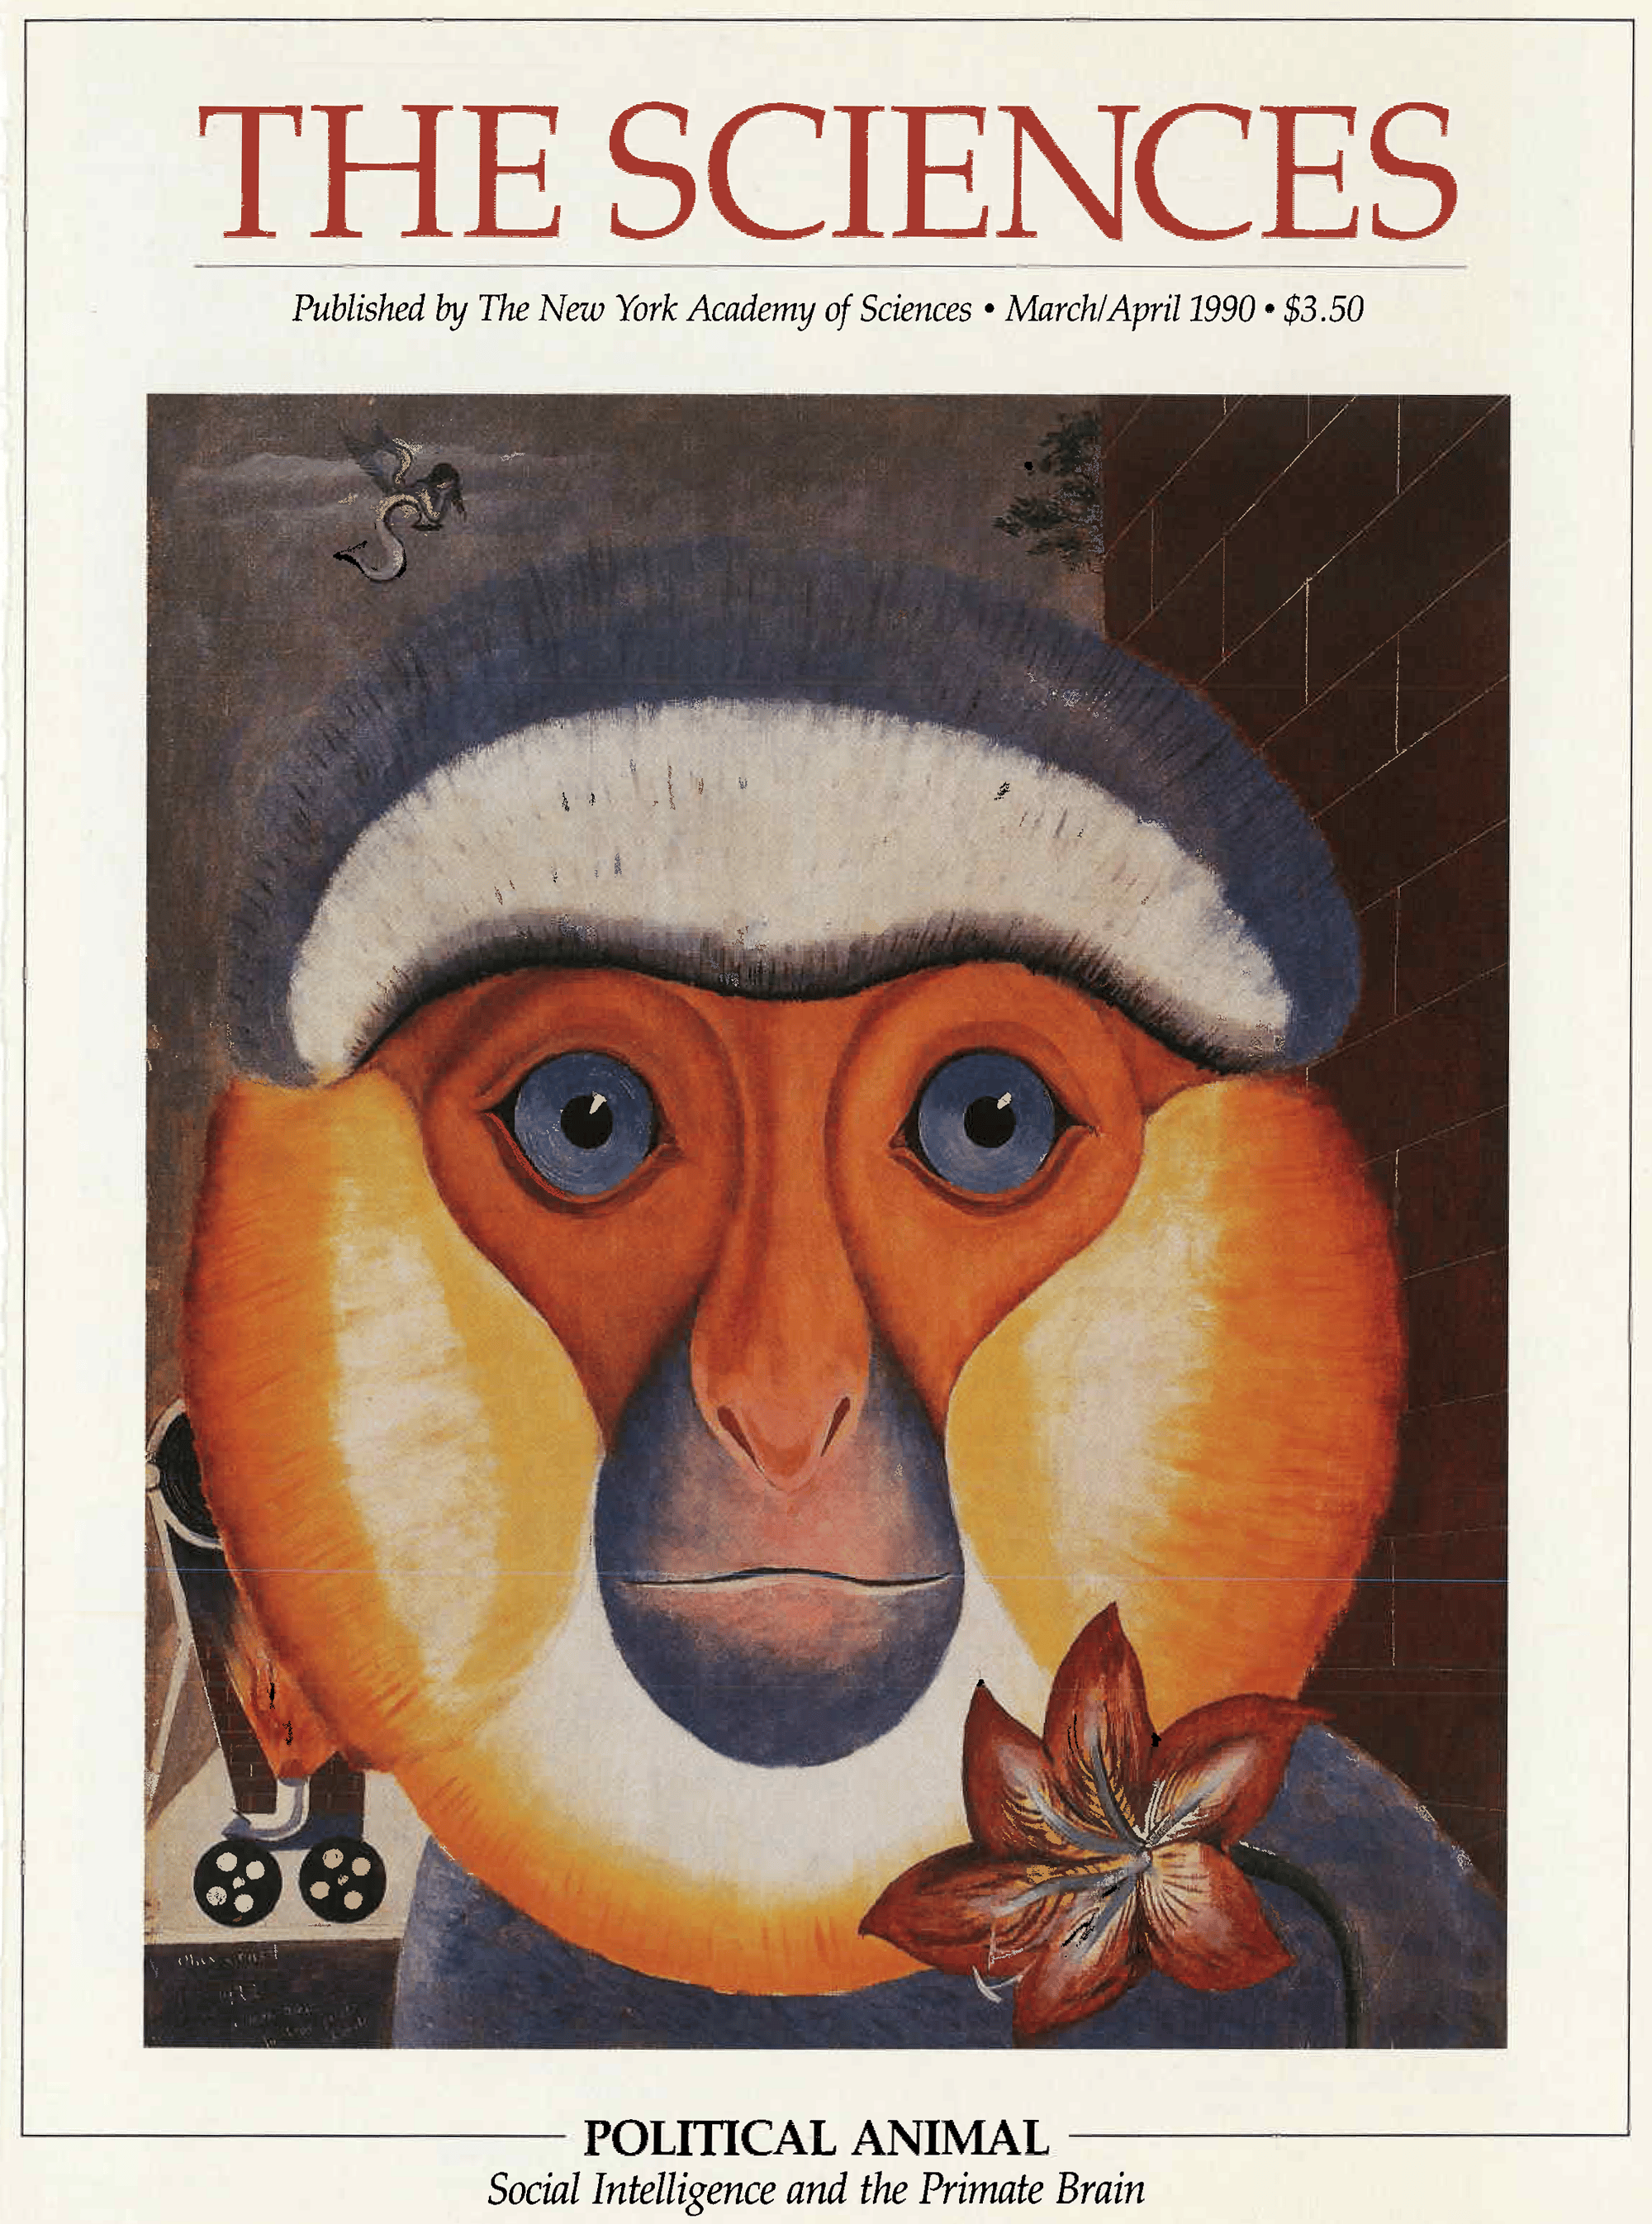 An illustrated primate graces the cover of "The Sciences" magazine. 